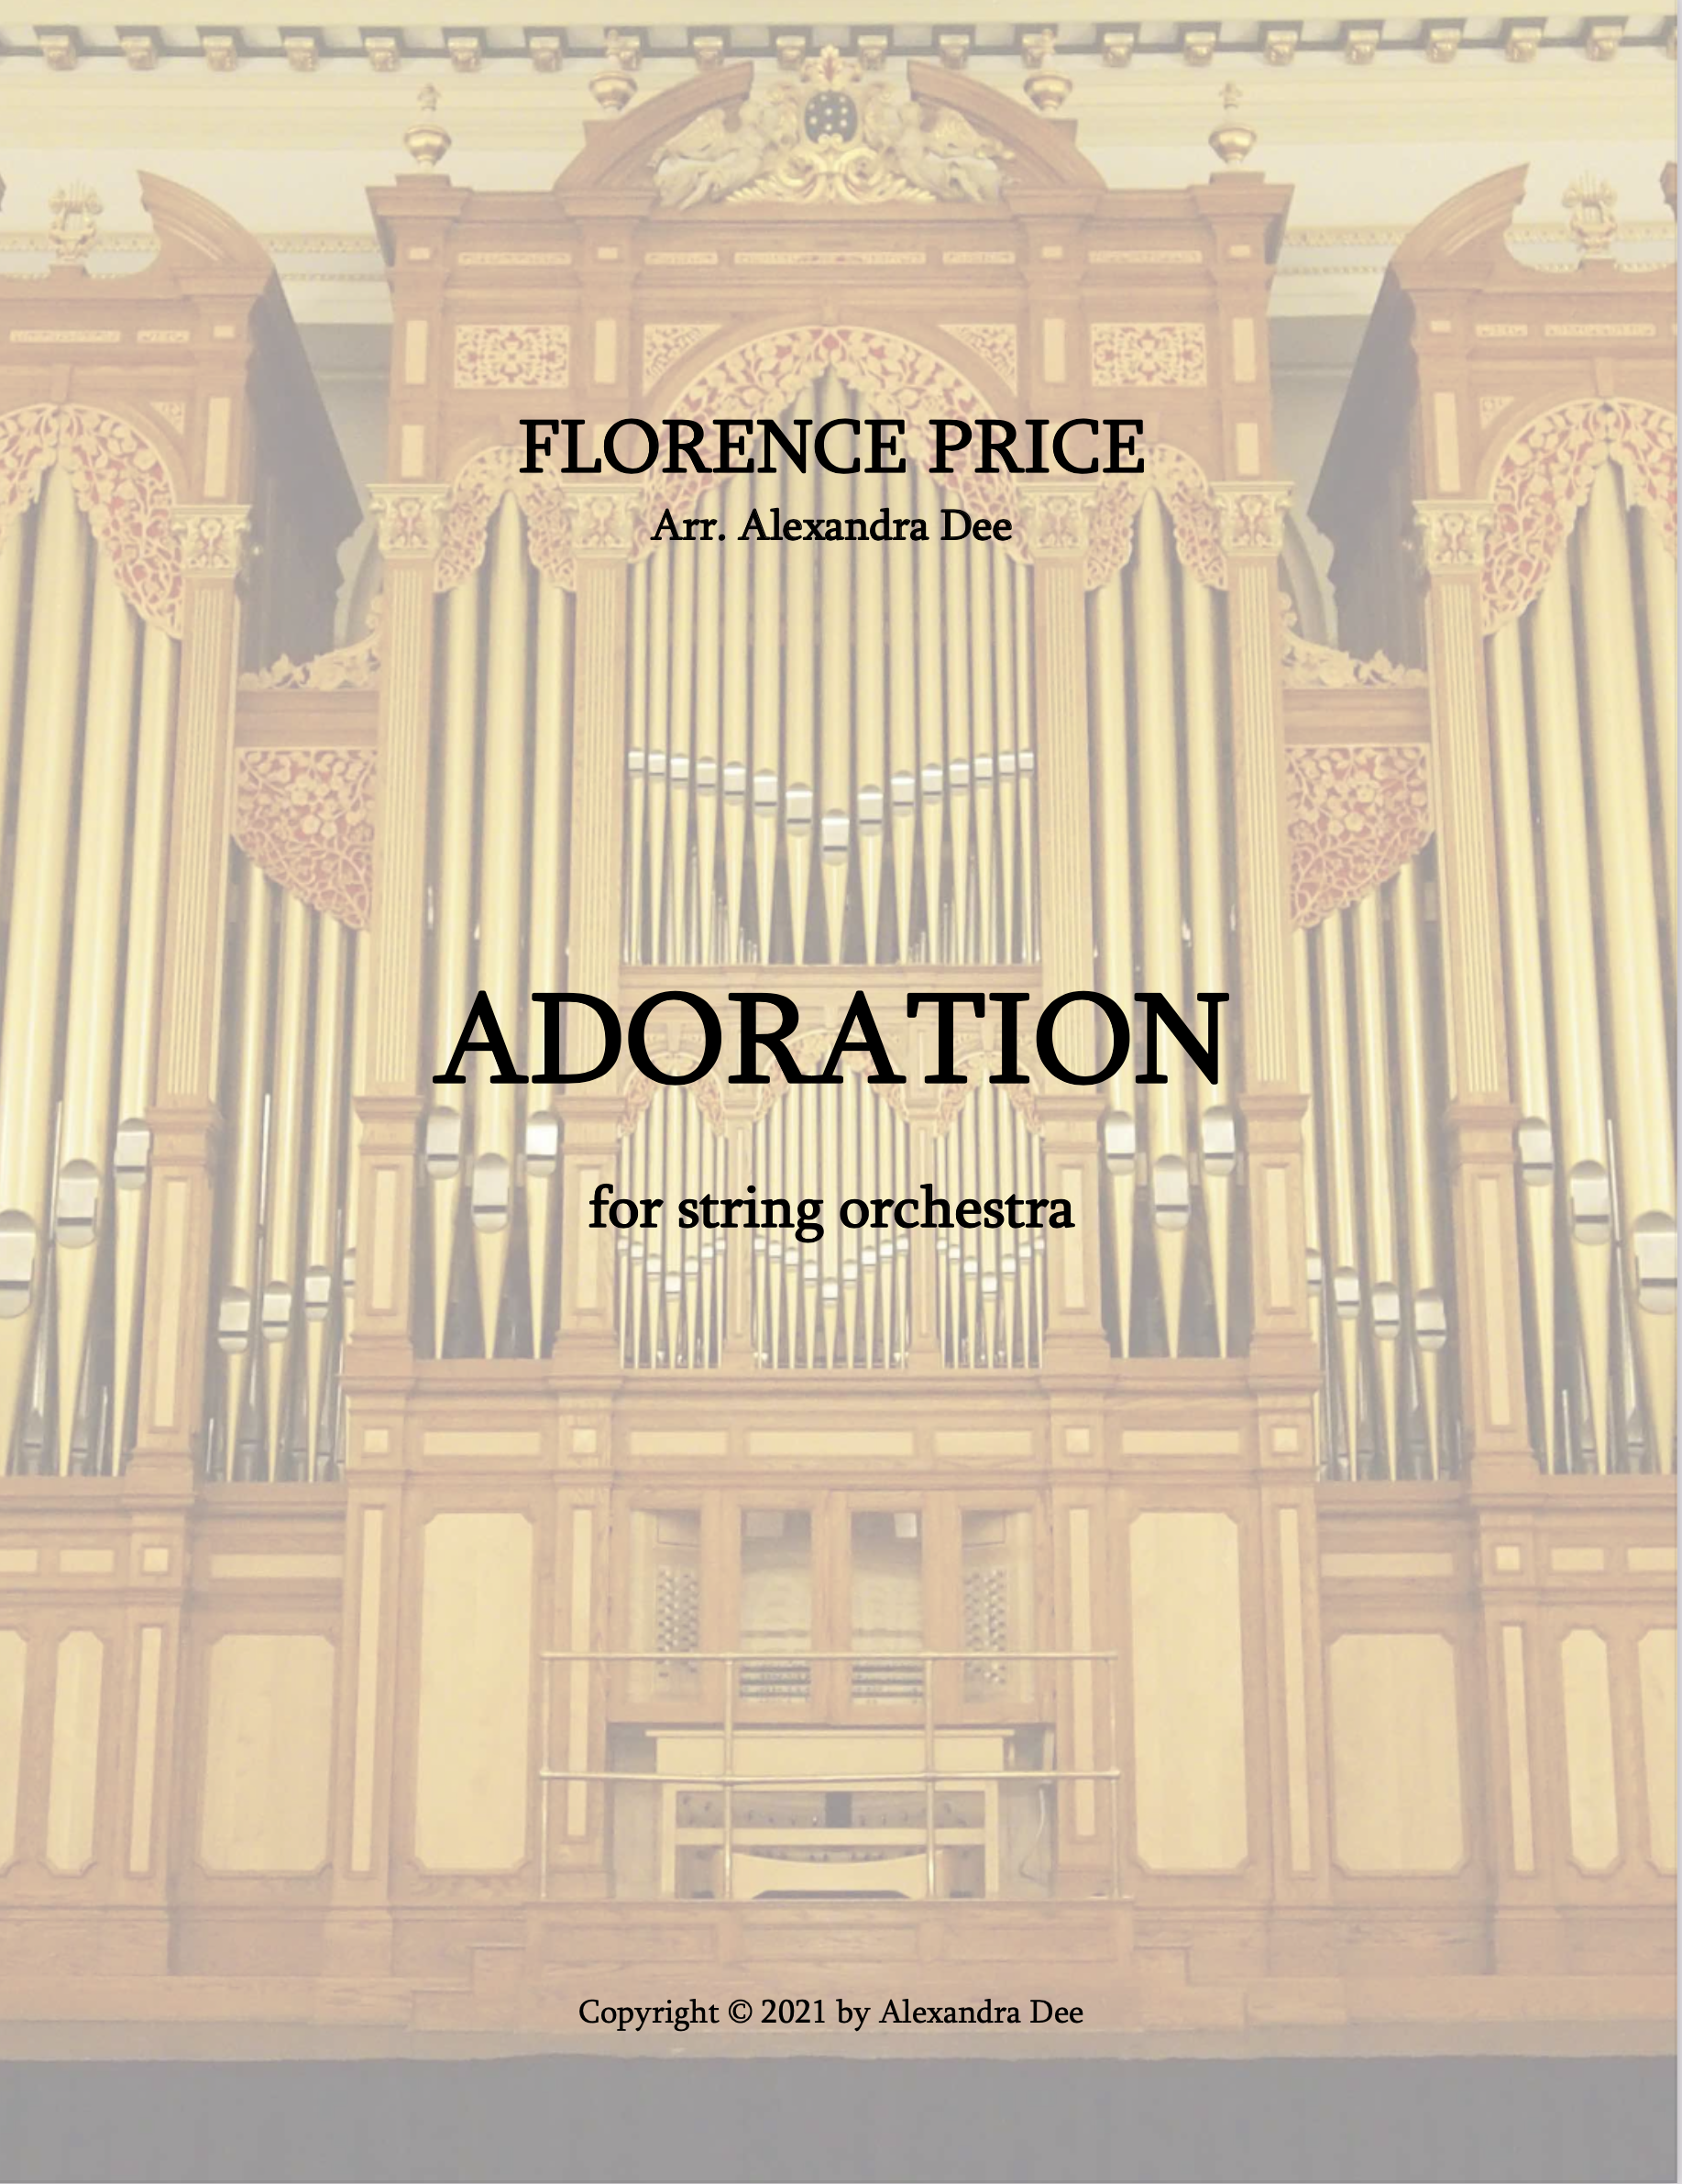 Adoration String Orchestra Version by Price, arr. Alexandra Dee